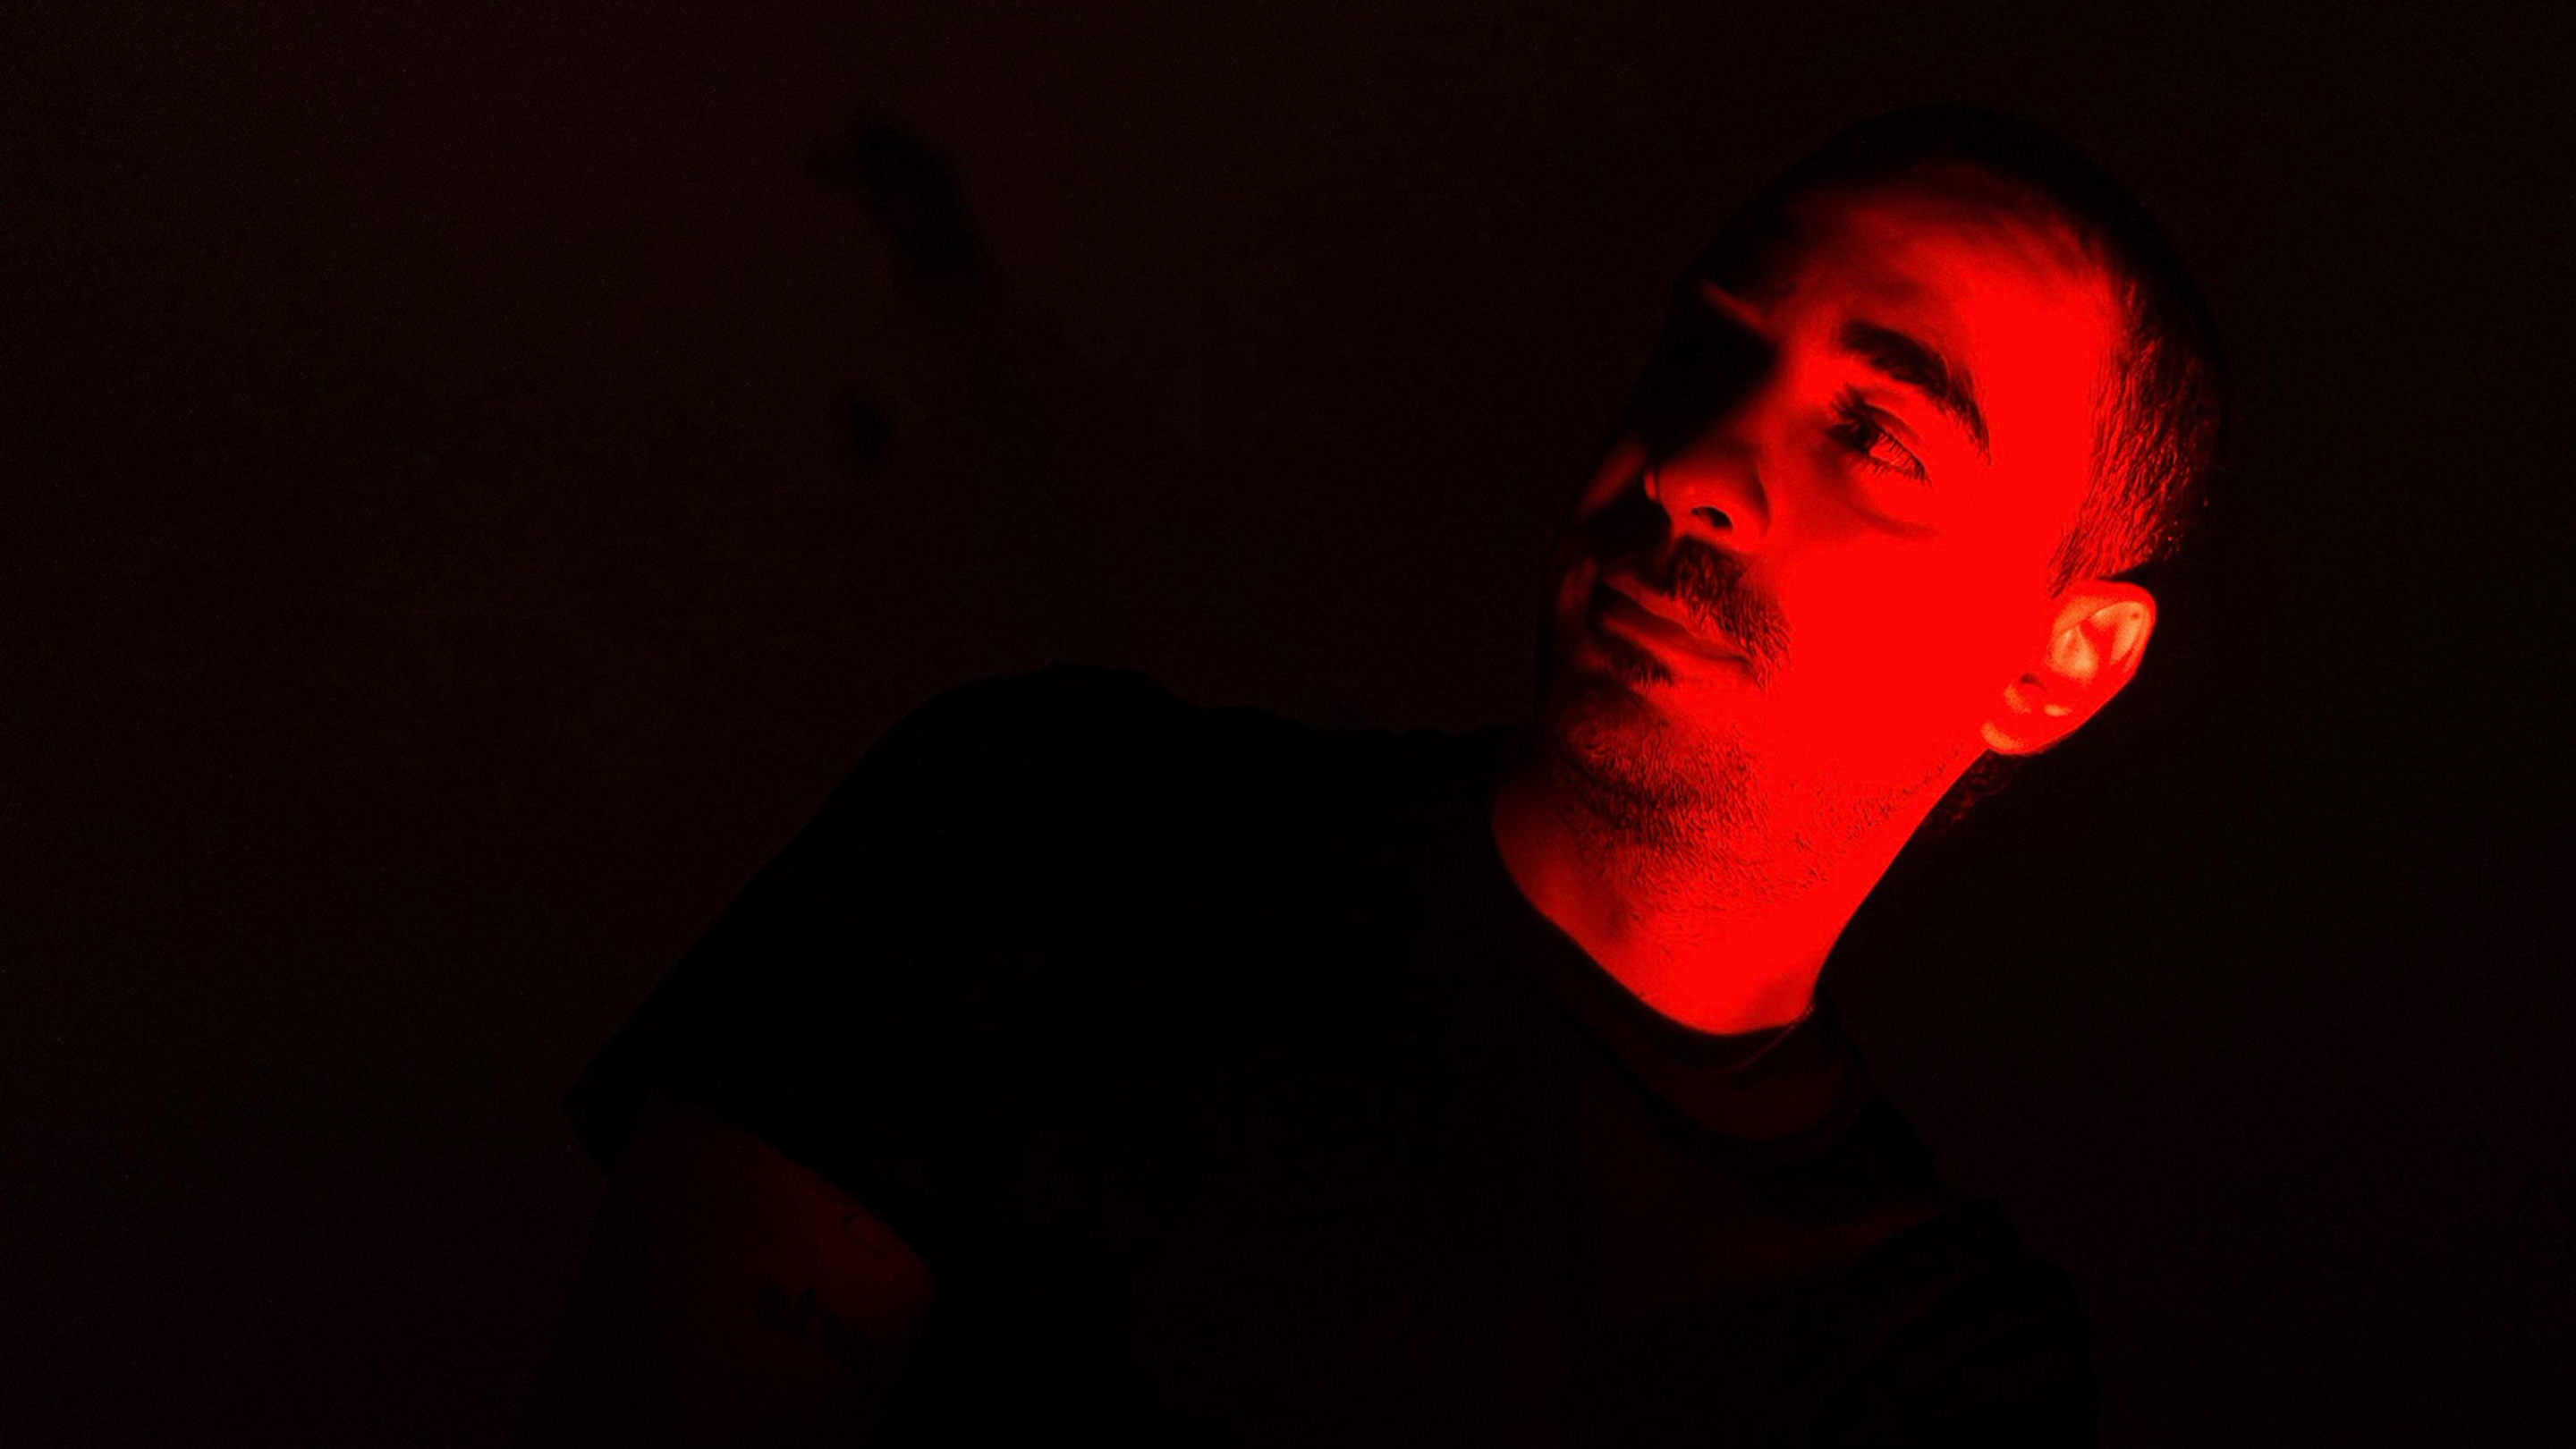 Moktar looking off side of screen at night, bathed in red light on one half of his face and body